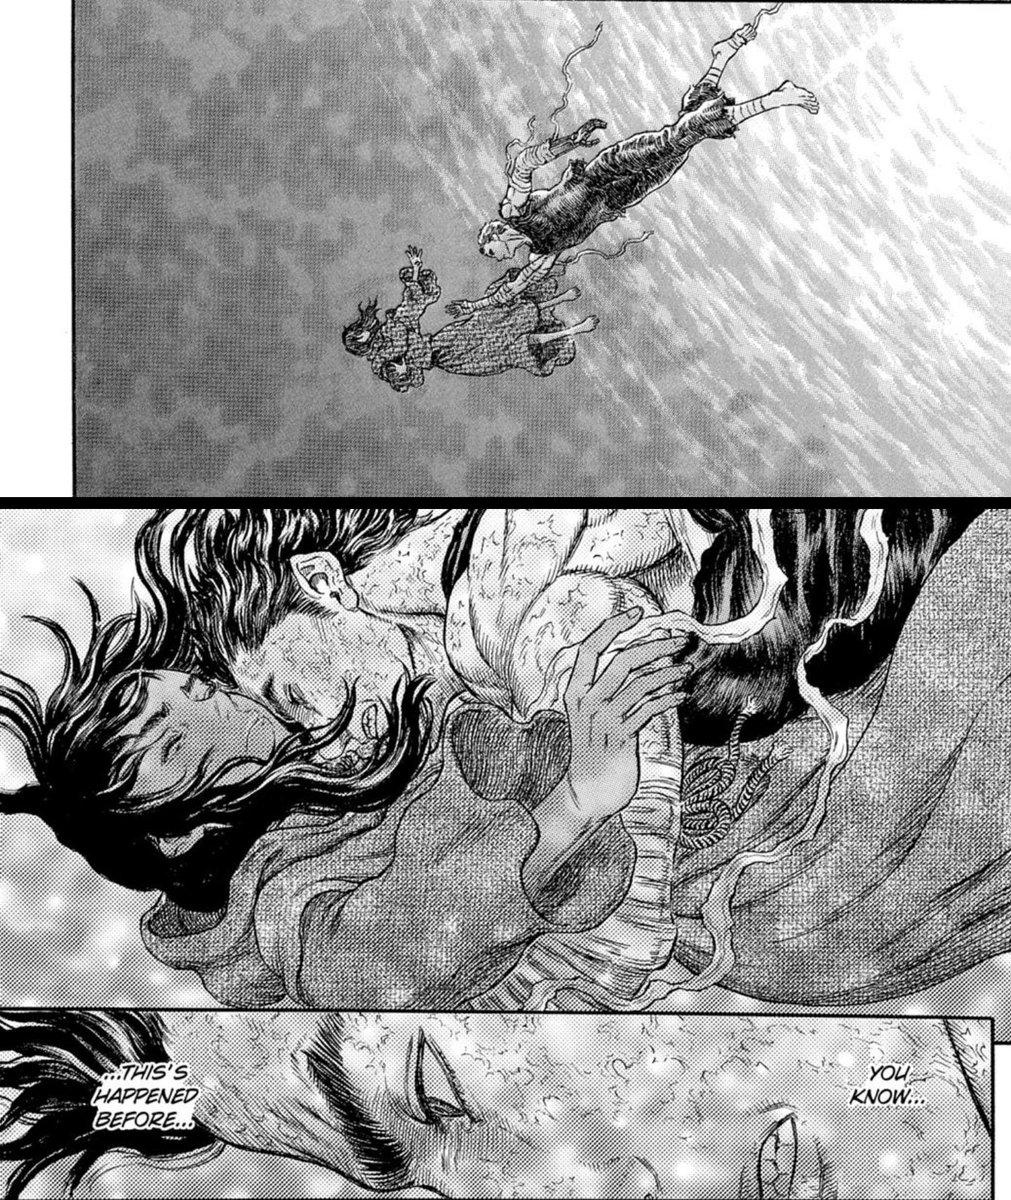 "... anytime she stands next to water, nothing good ever comes of it ..."🌊

#guts #casca #berserk 